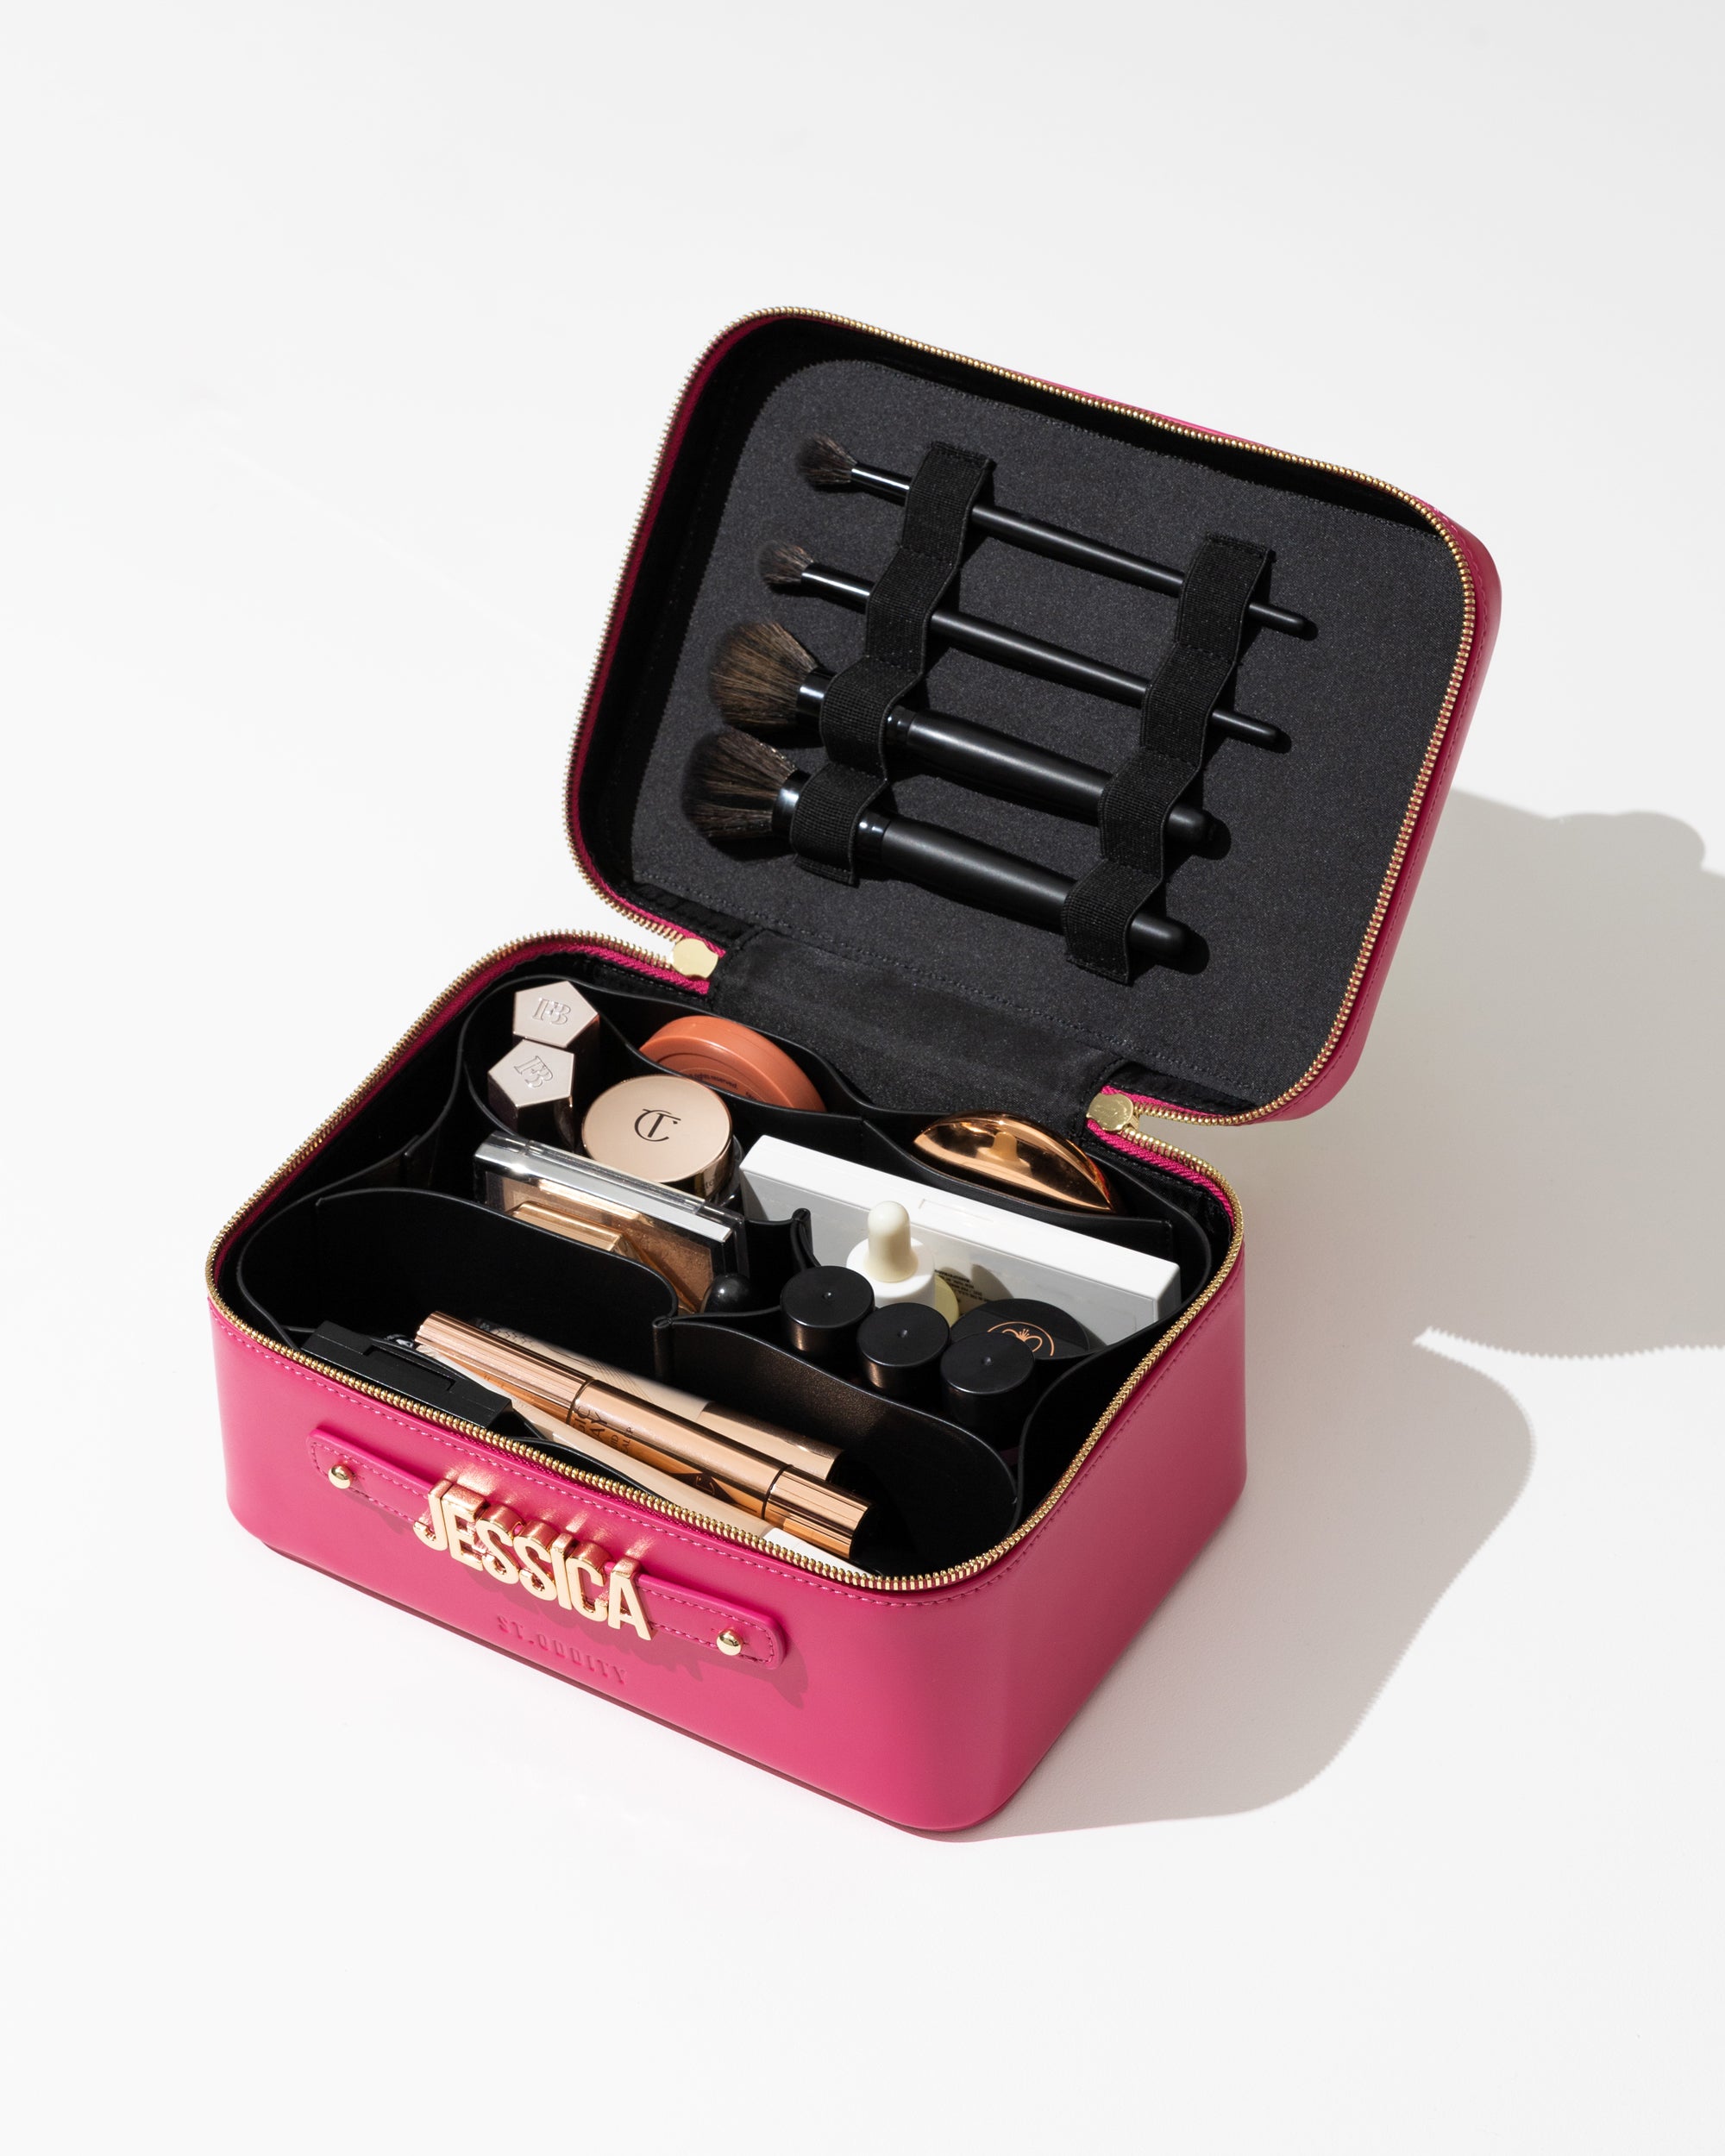 Pre-order (Mid-May): Vanity Case in Hot Pink with Personalised Hardware